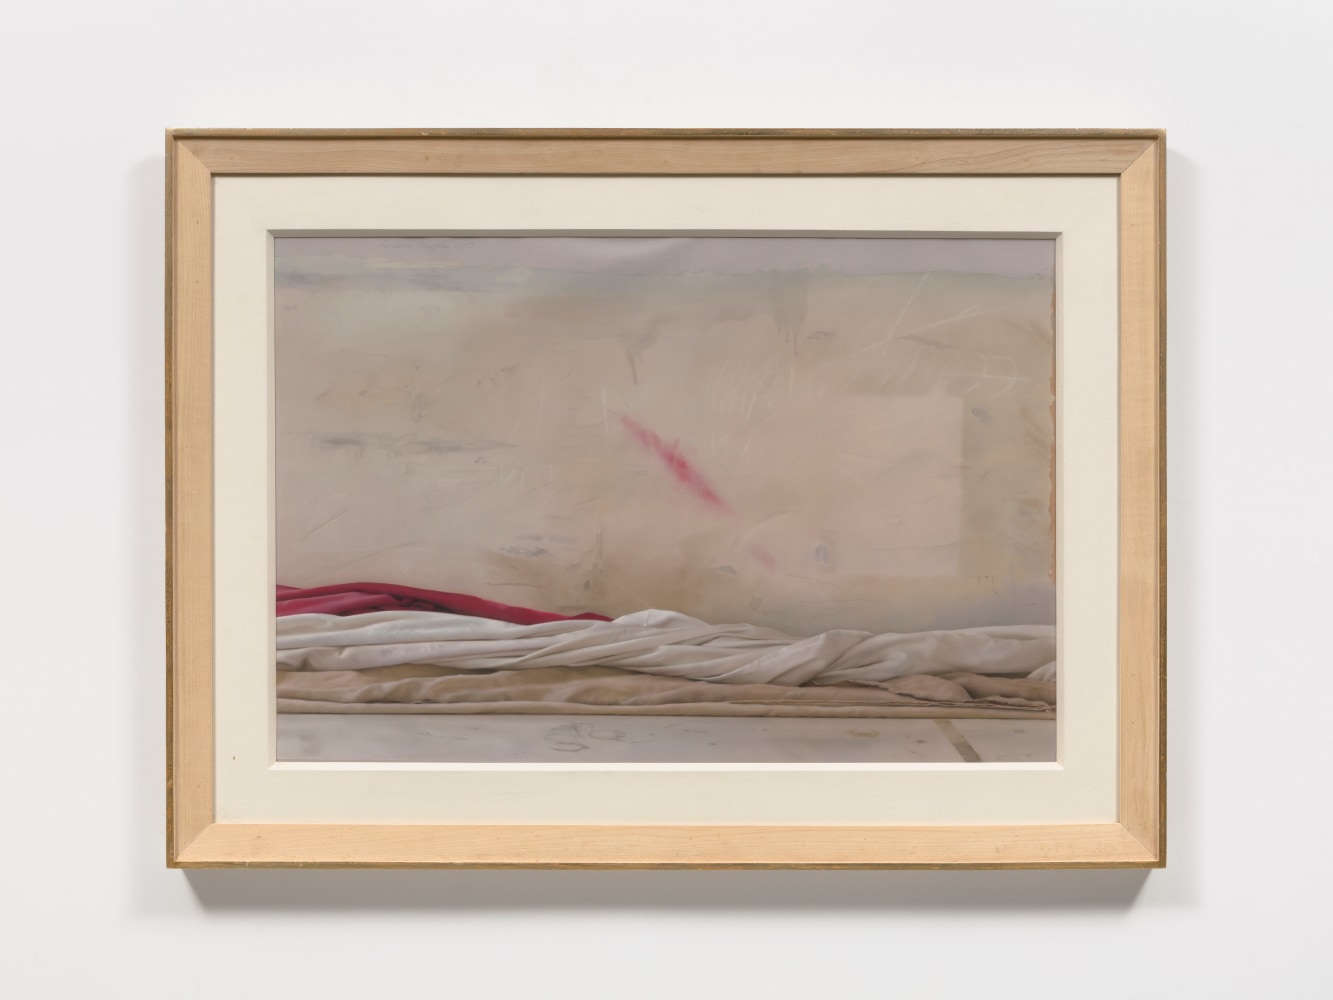 Pastel on paper work by Ricardo Maffei featuring a hyper-realistic rendering of white, beige and red cloth